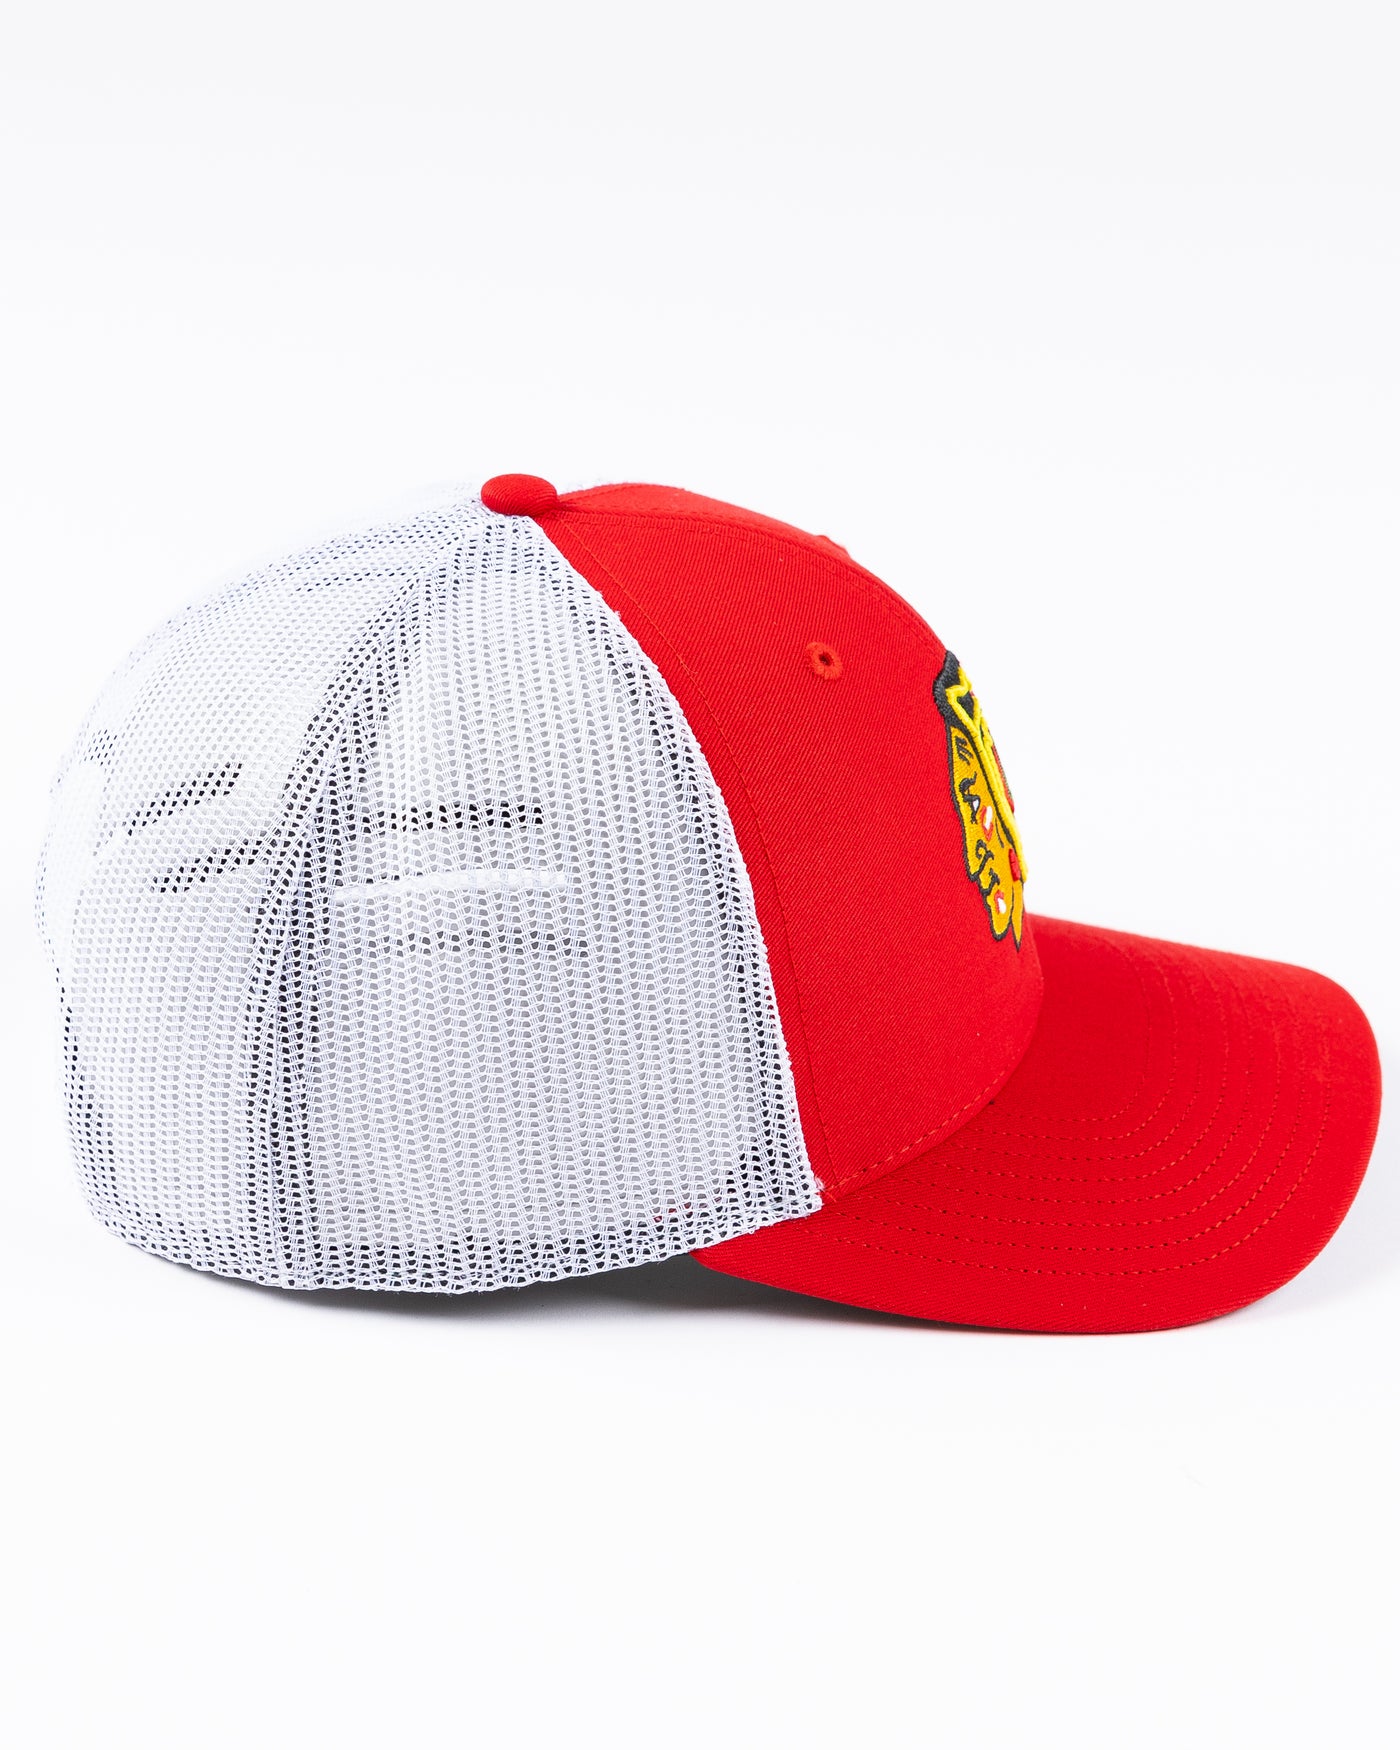 red and white '47 brand trucker cap with Chicago Blackhawks primary logo embroidered on front - right side lay flat